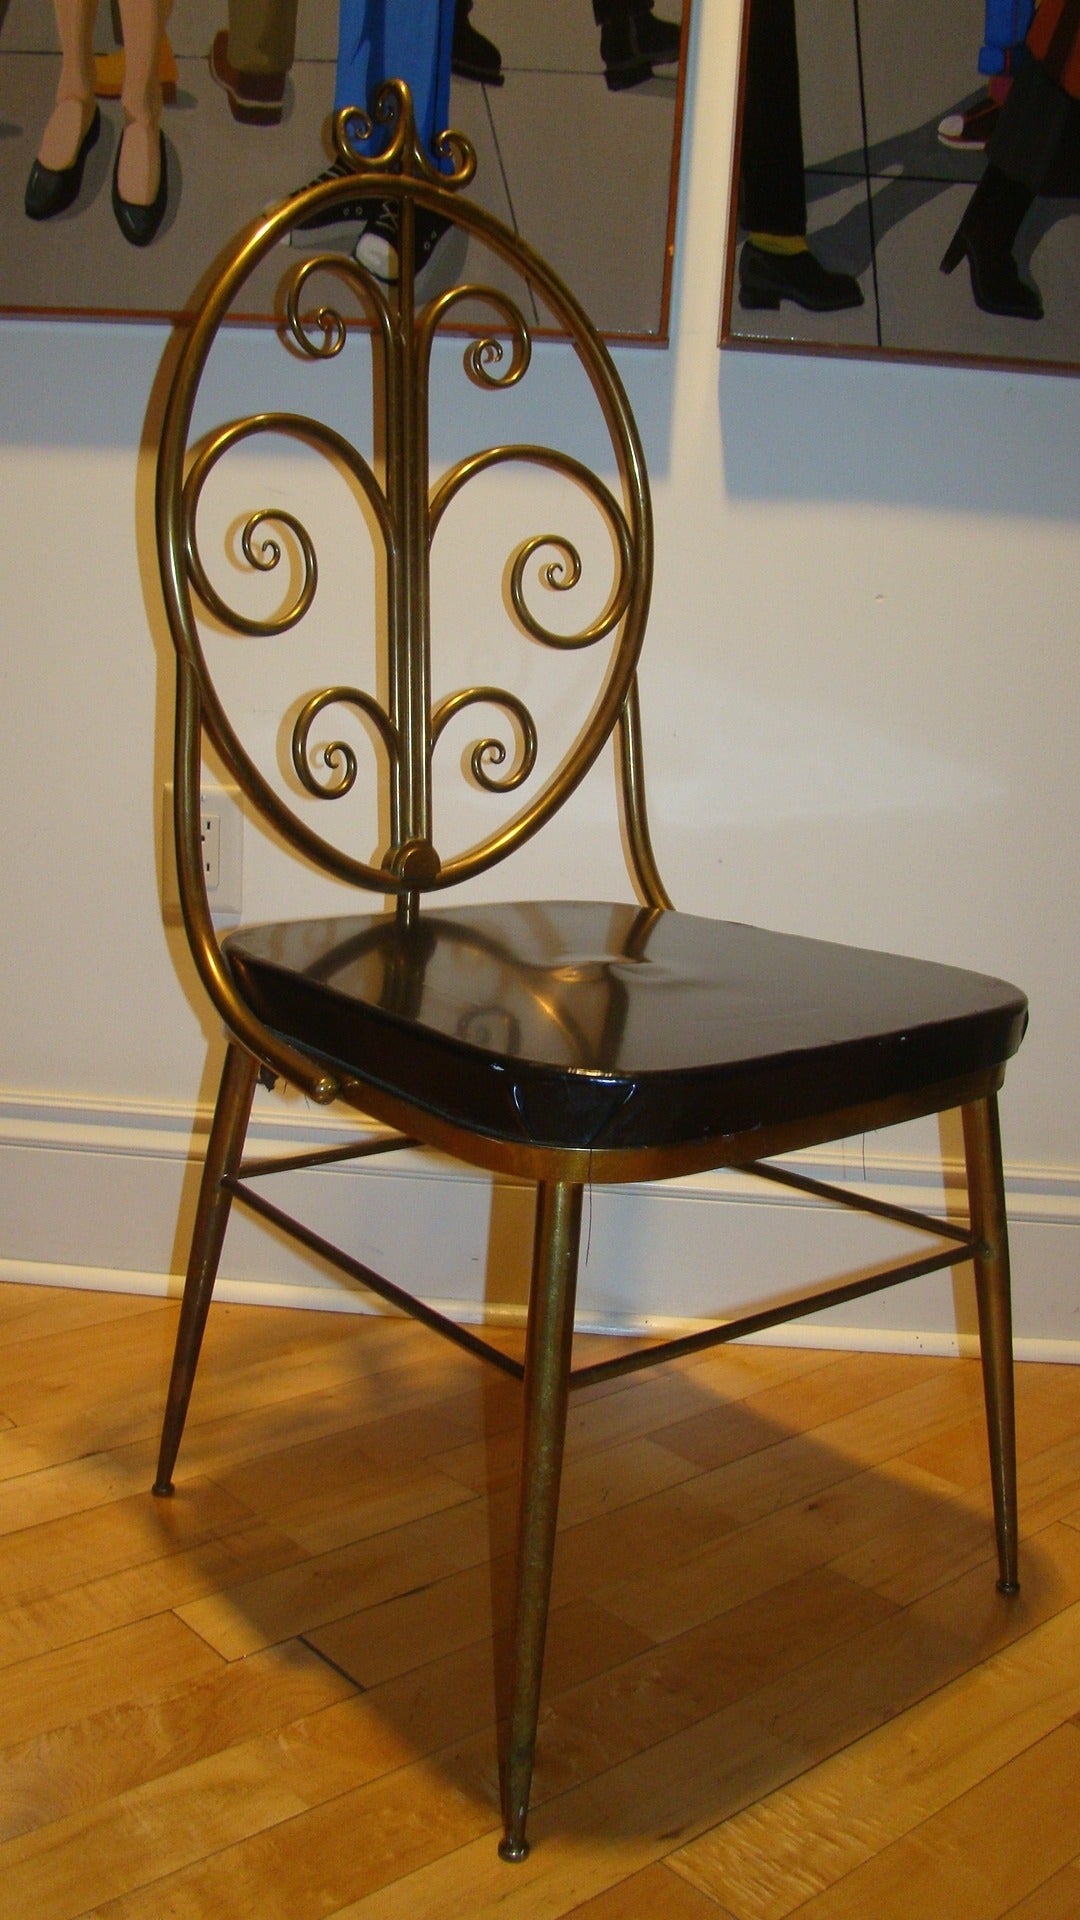 Beautiful and hard to find Italian brass Chiavari chair in the manner of Gio Ponti. This unusual design is comprised of a sculptural brass flowing form with intricate design and original black seat. Truly a special chair in person!